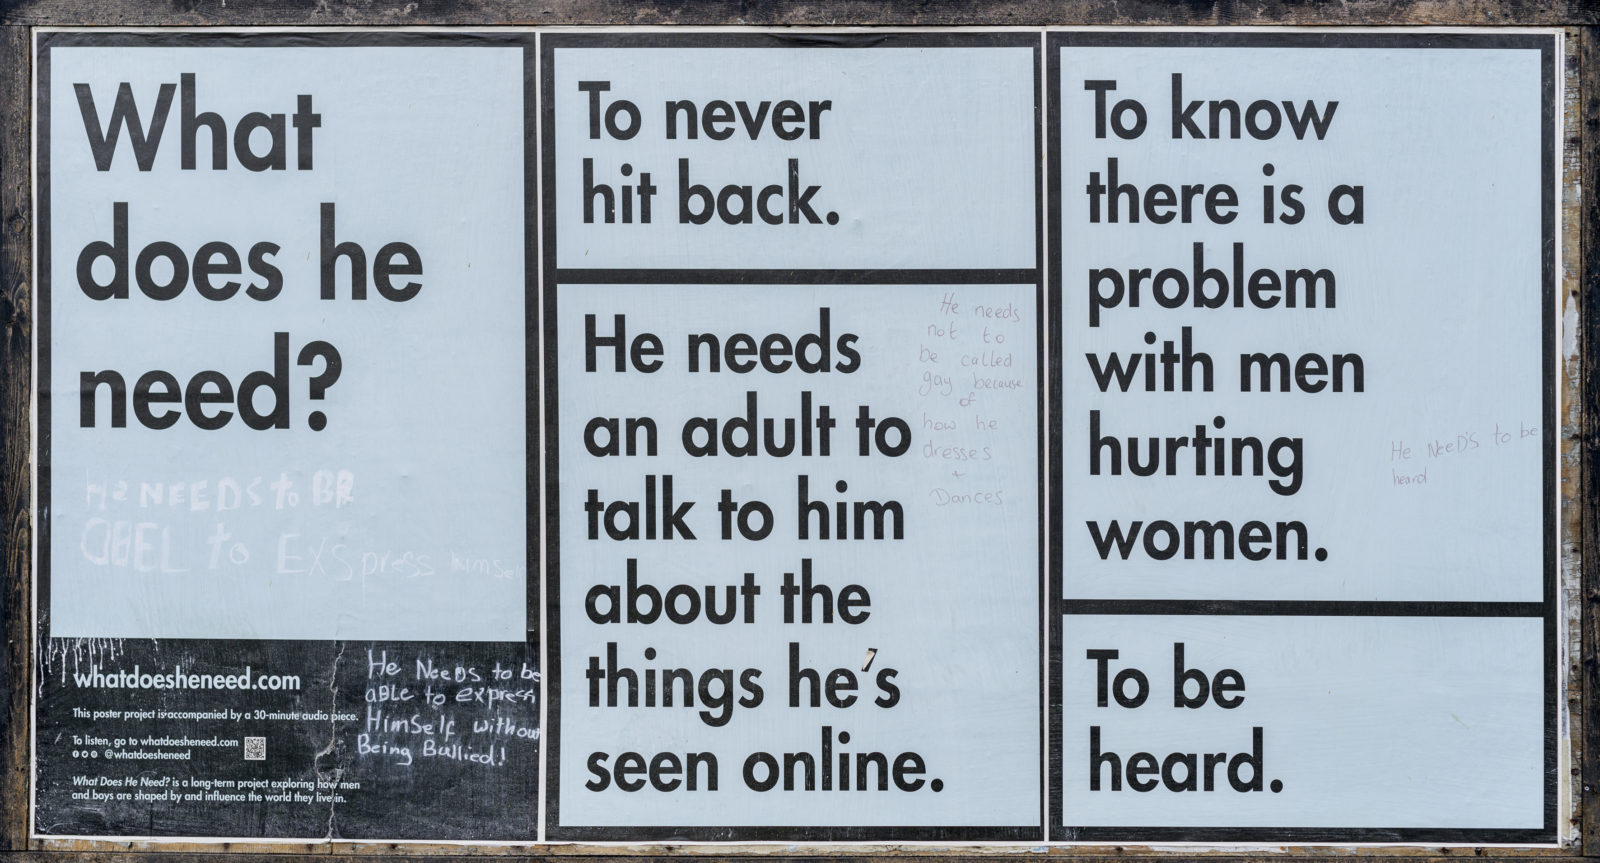 A series of black and white text based posters on an  outdoor wall asking "what does he need?"